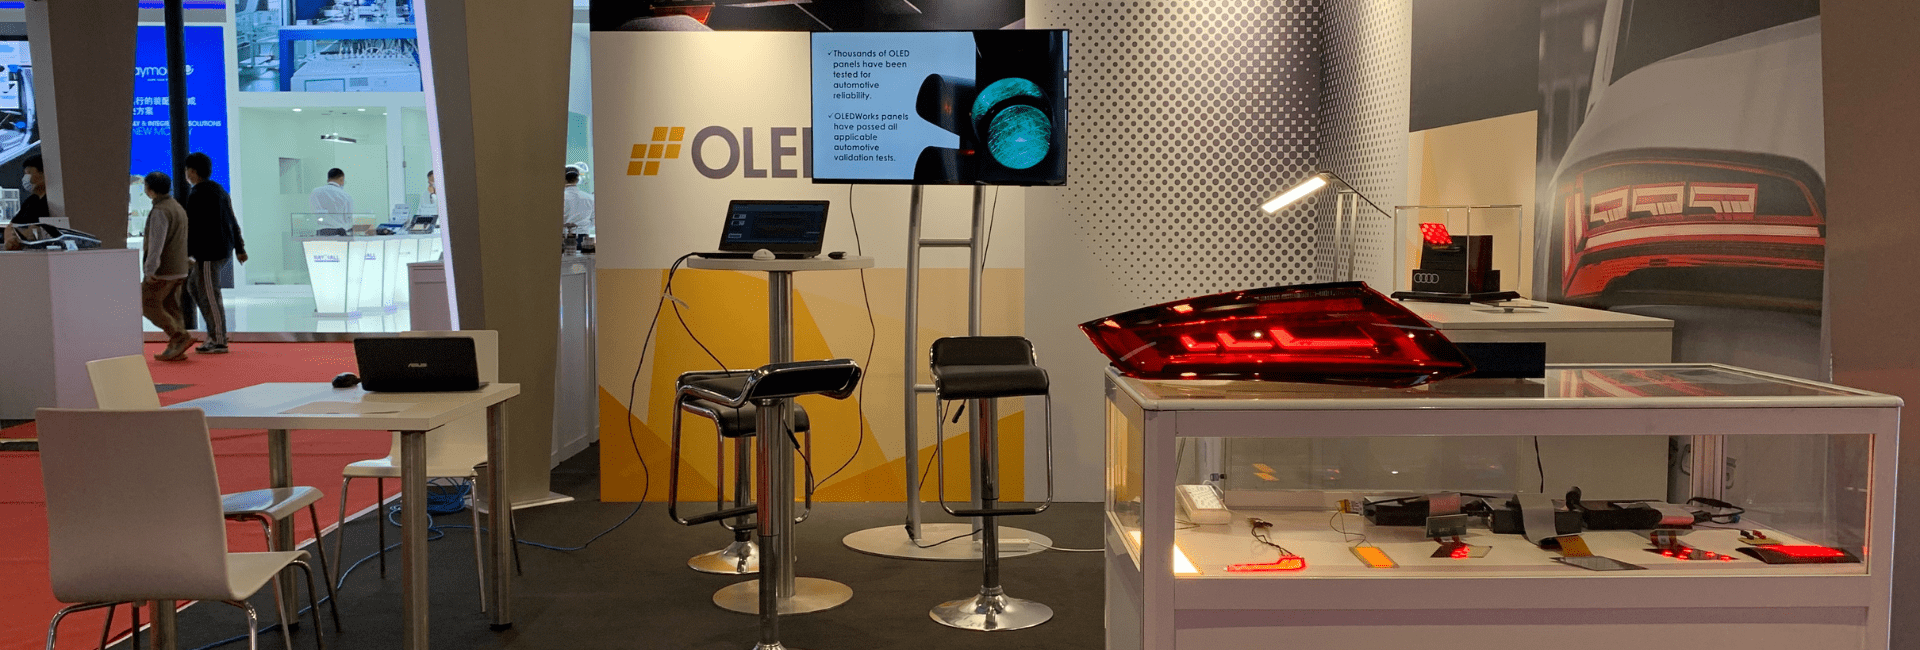 Automotive OLED Lighting Solutions Featured in the OLEDWorks Booth at the Largest Automotive Show in the World